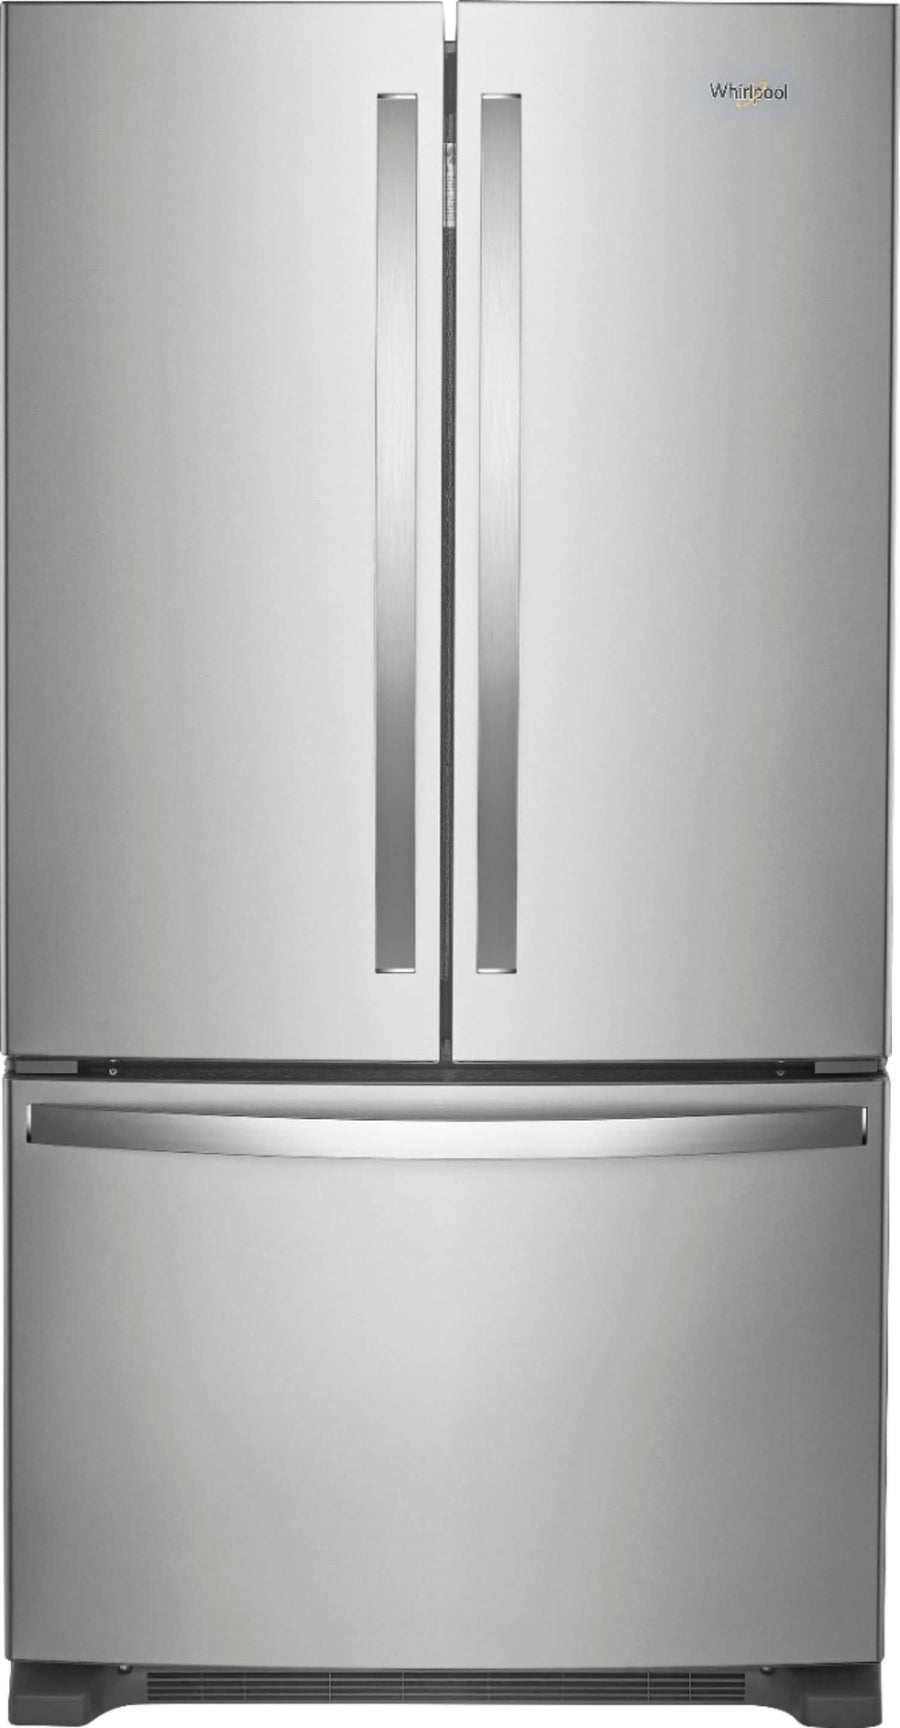 Whirlpool - 25.2 Cu. Ft. French Door Refrigerator with Internal Water Dispenser - Stainless steel_0